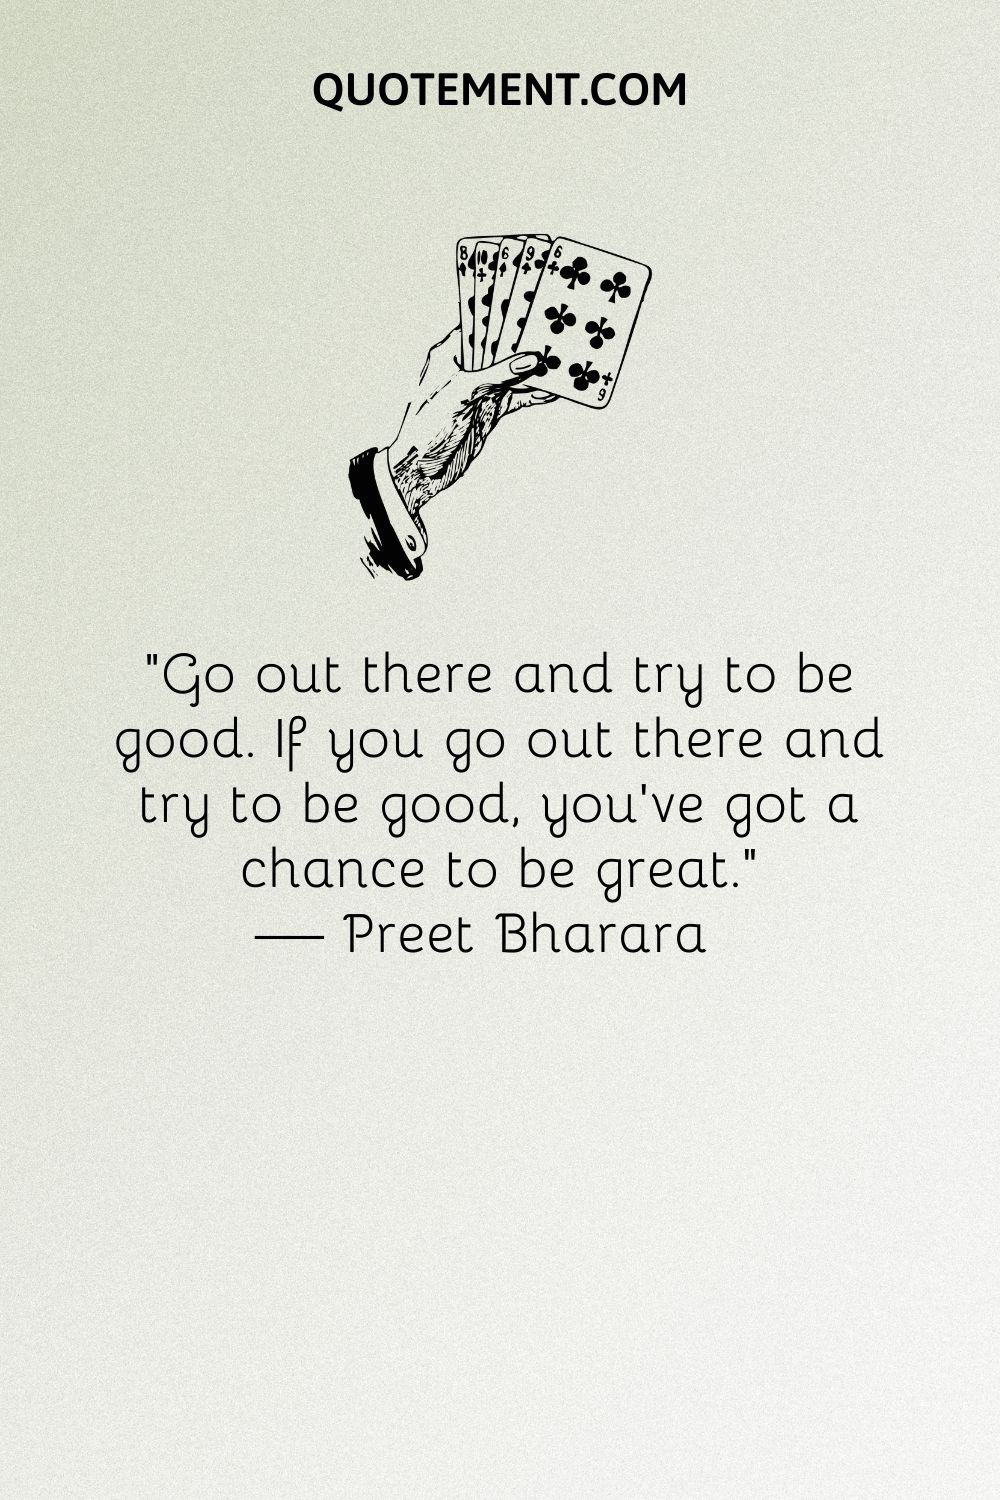 Go out there and try to be good. If you go out there and try to be good, you've got a chance to be great